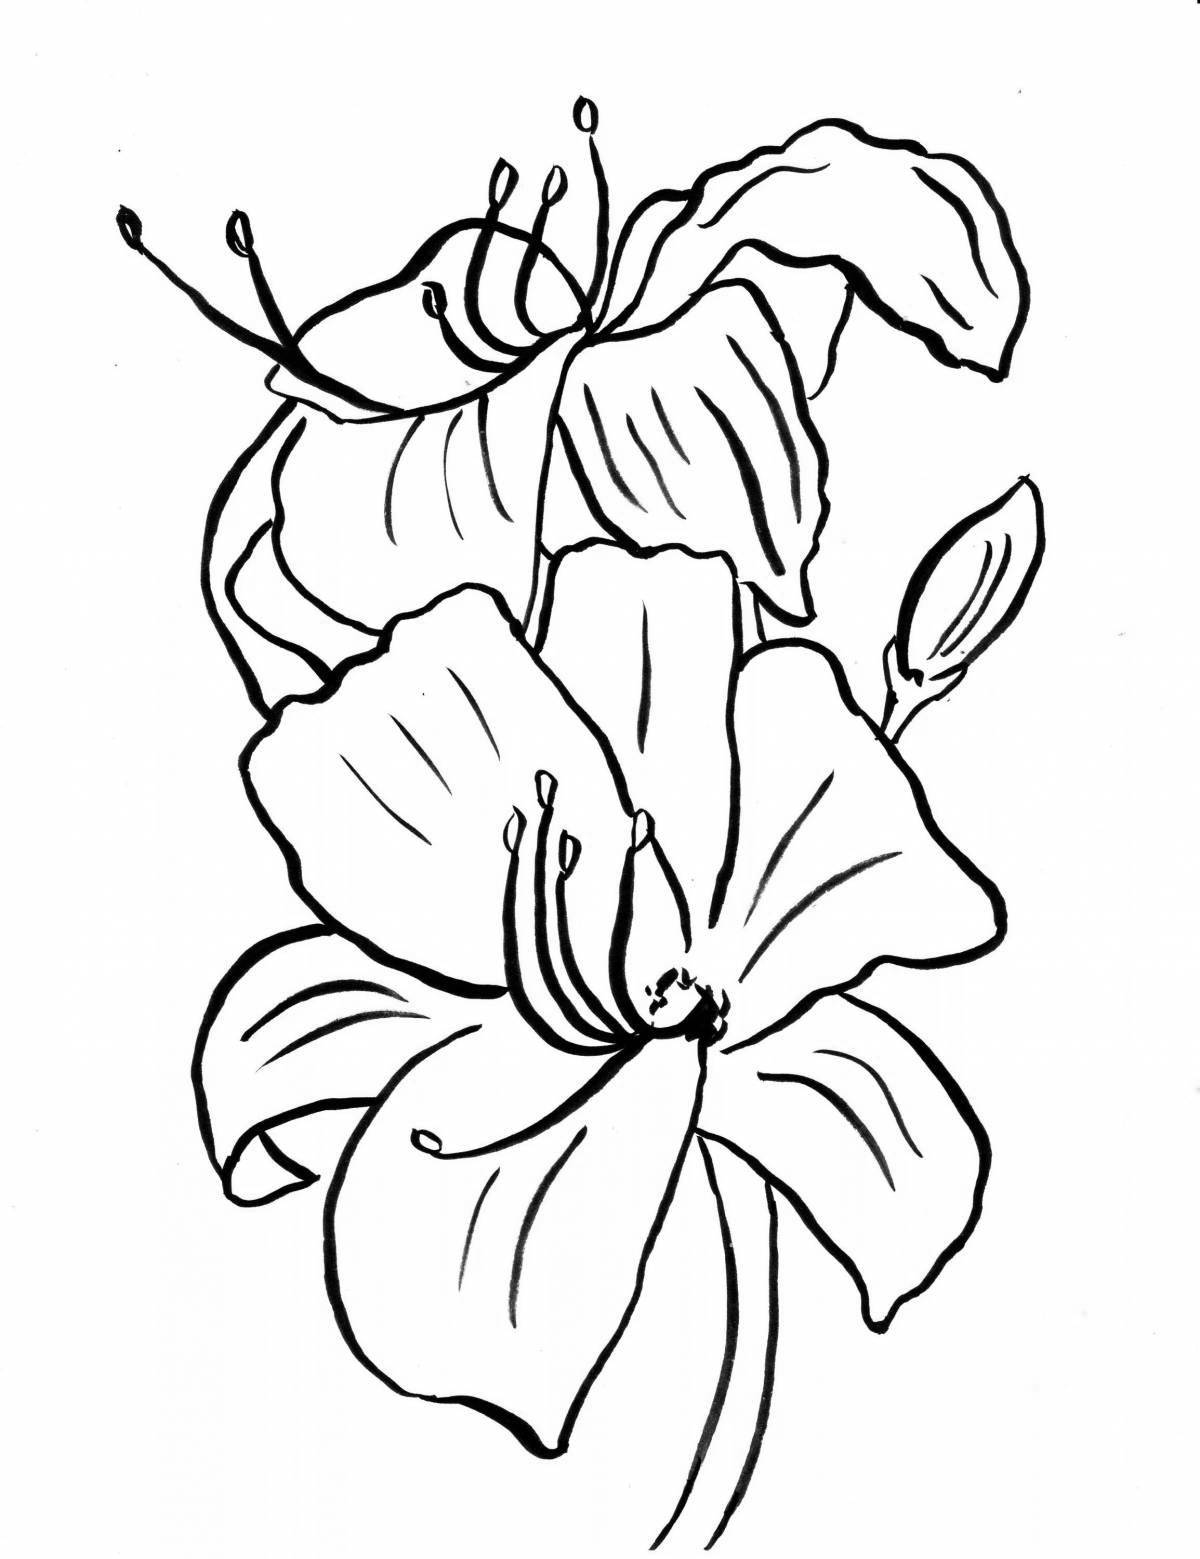 Lily flowers coloring book